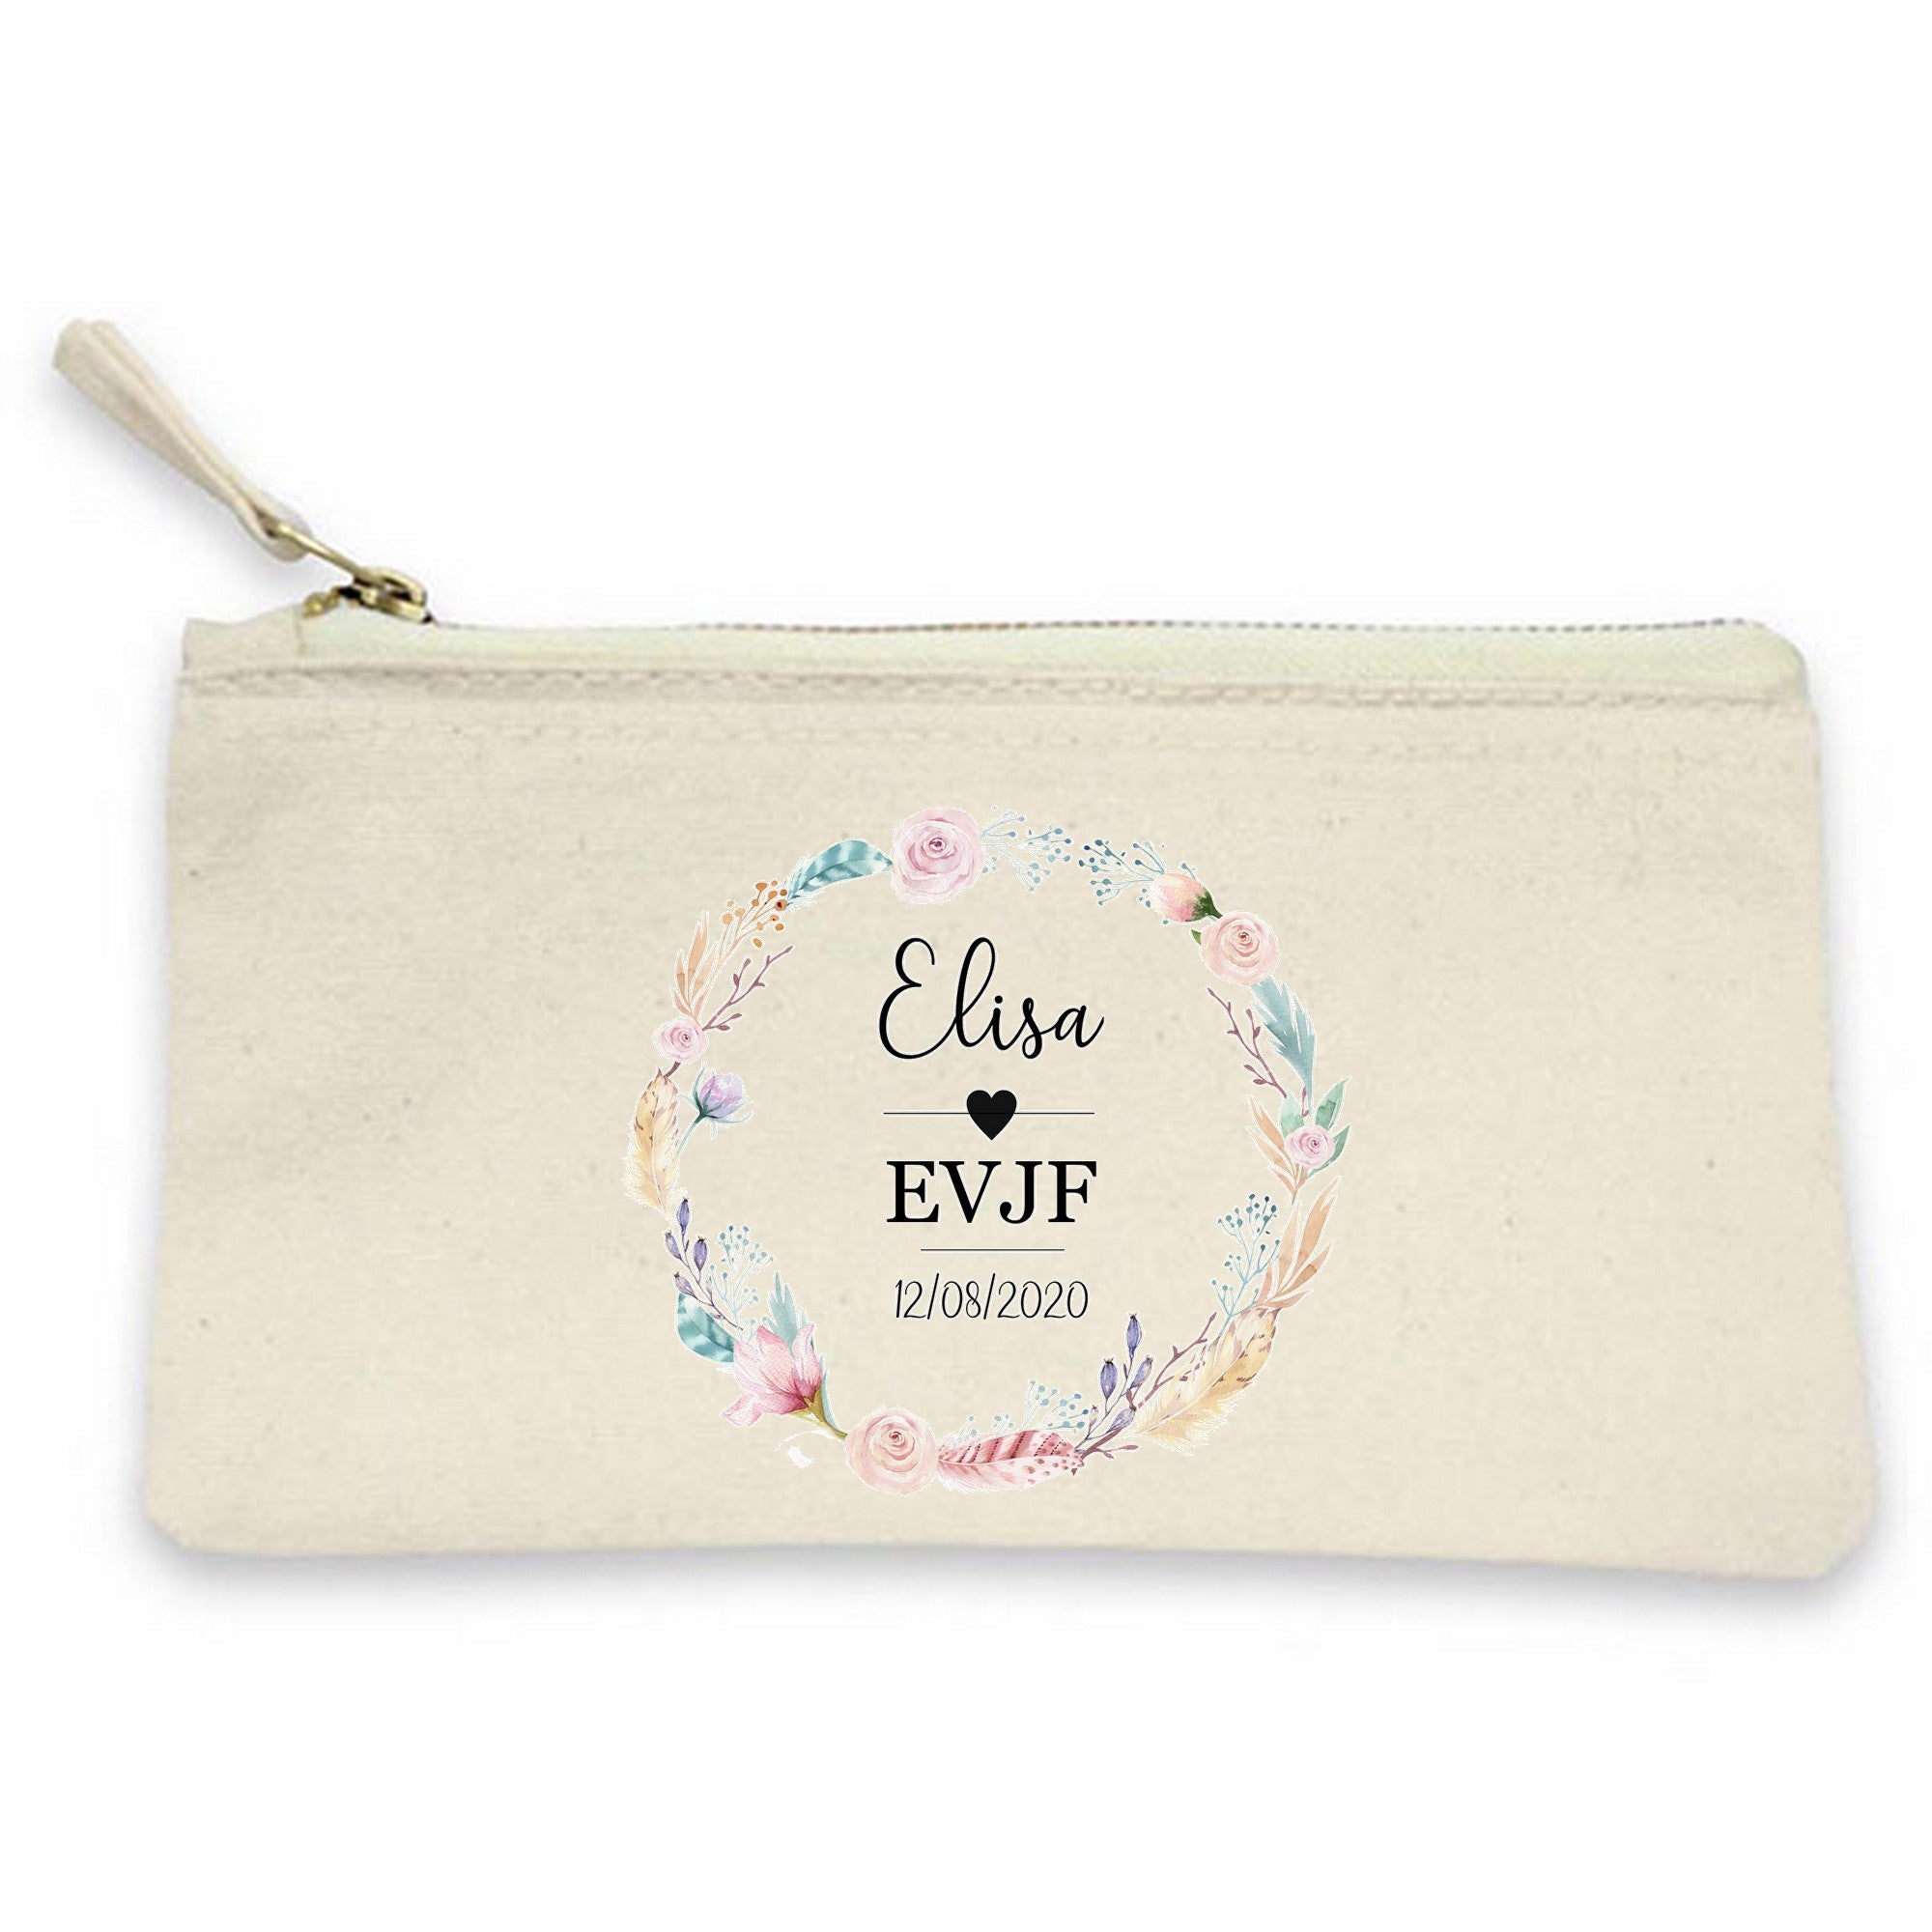 Trousse personnalisée evjf – Cool and the bag